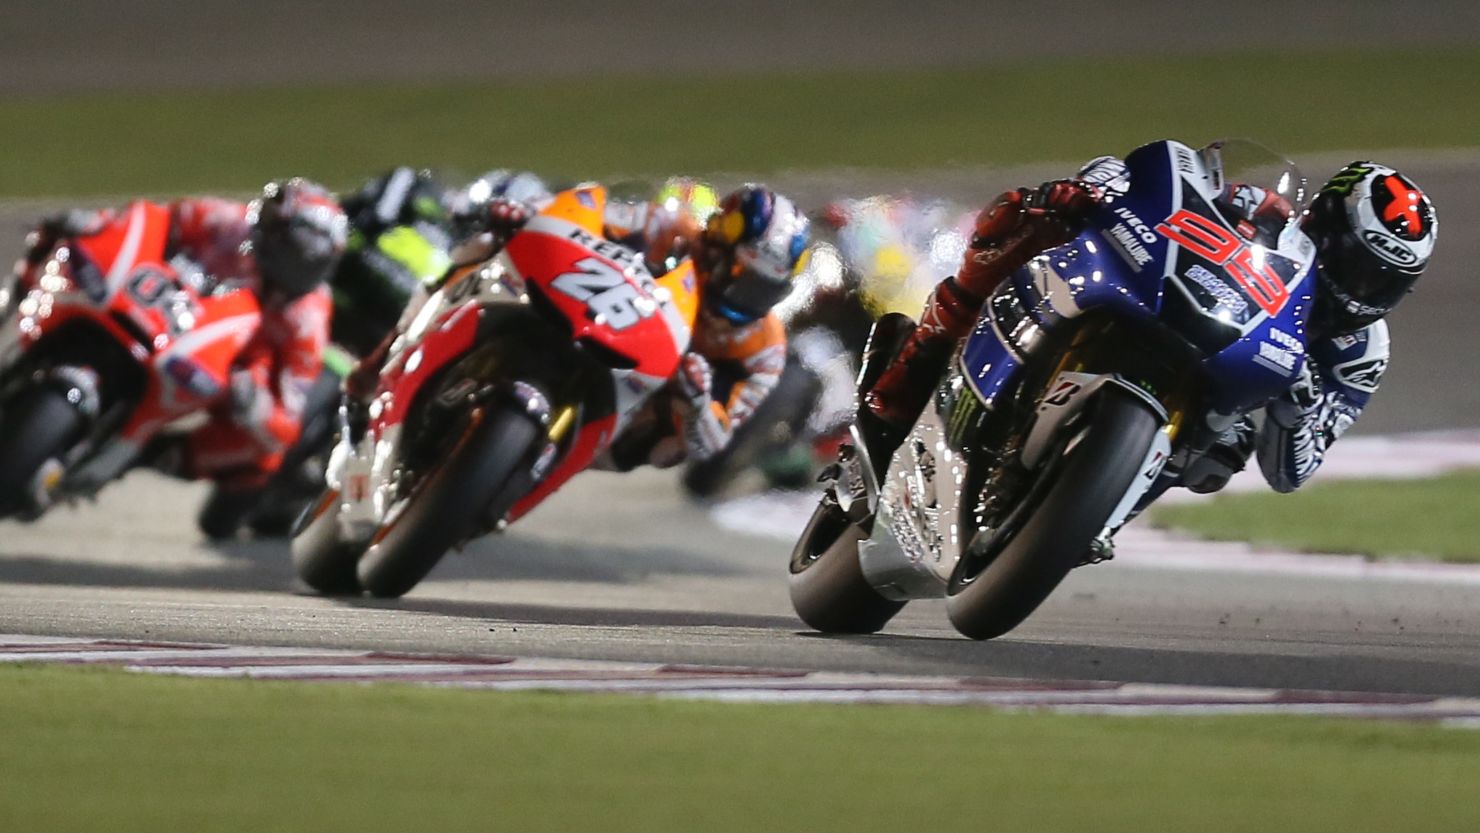 Spanish motorcycling star Jorge Lorenzo out in front during Sunday's Qatar Grand Prix in Doha.